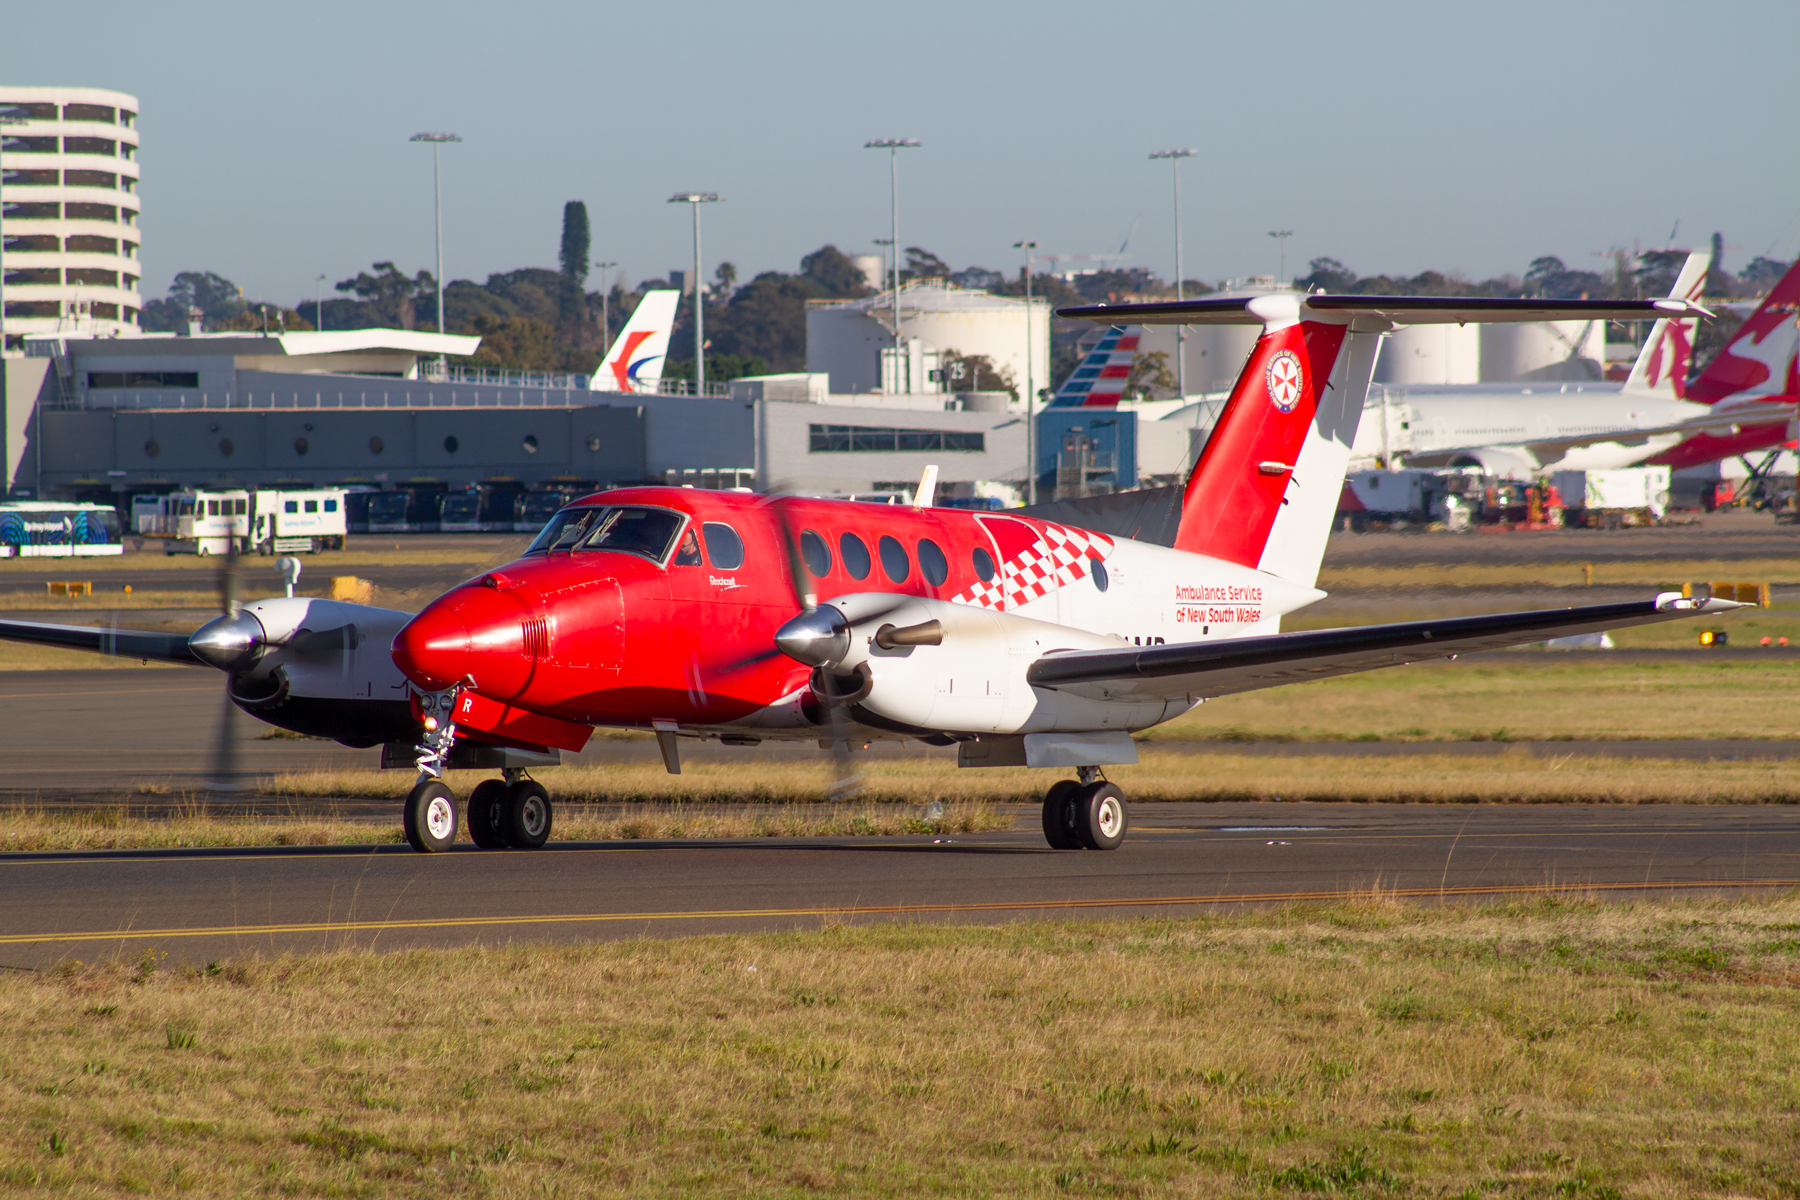 RFDS - Royal Flying Doctor Service (South Eastern Section) Beech King Air 200C VH-AMR at Kingsford Smith